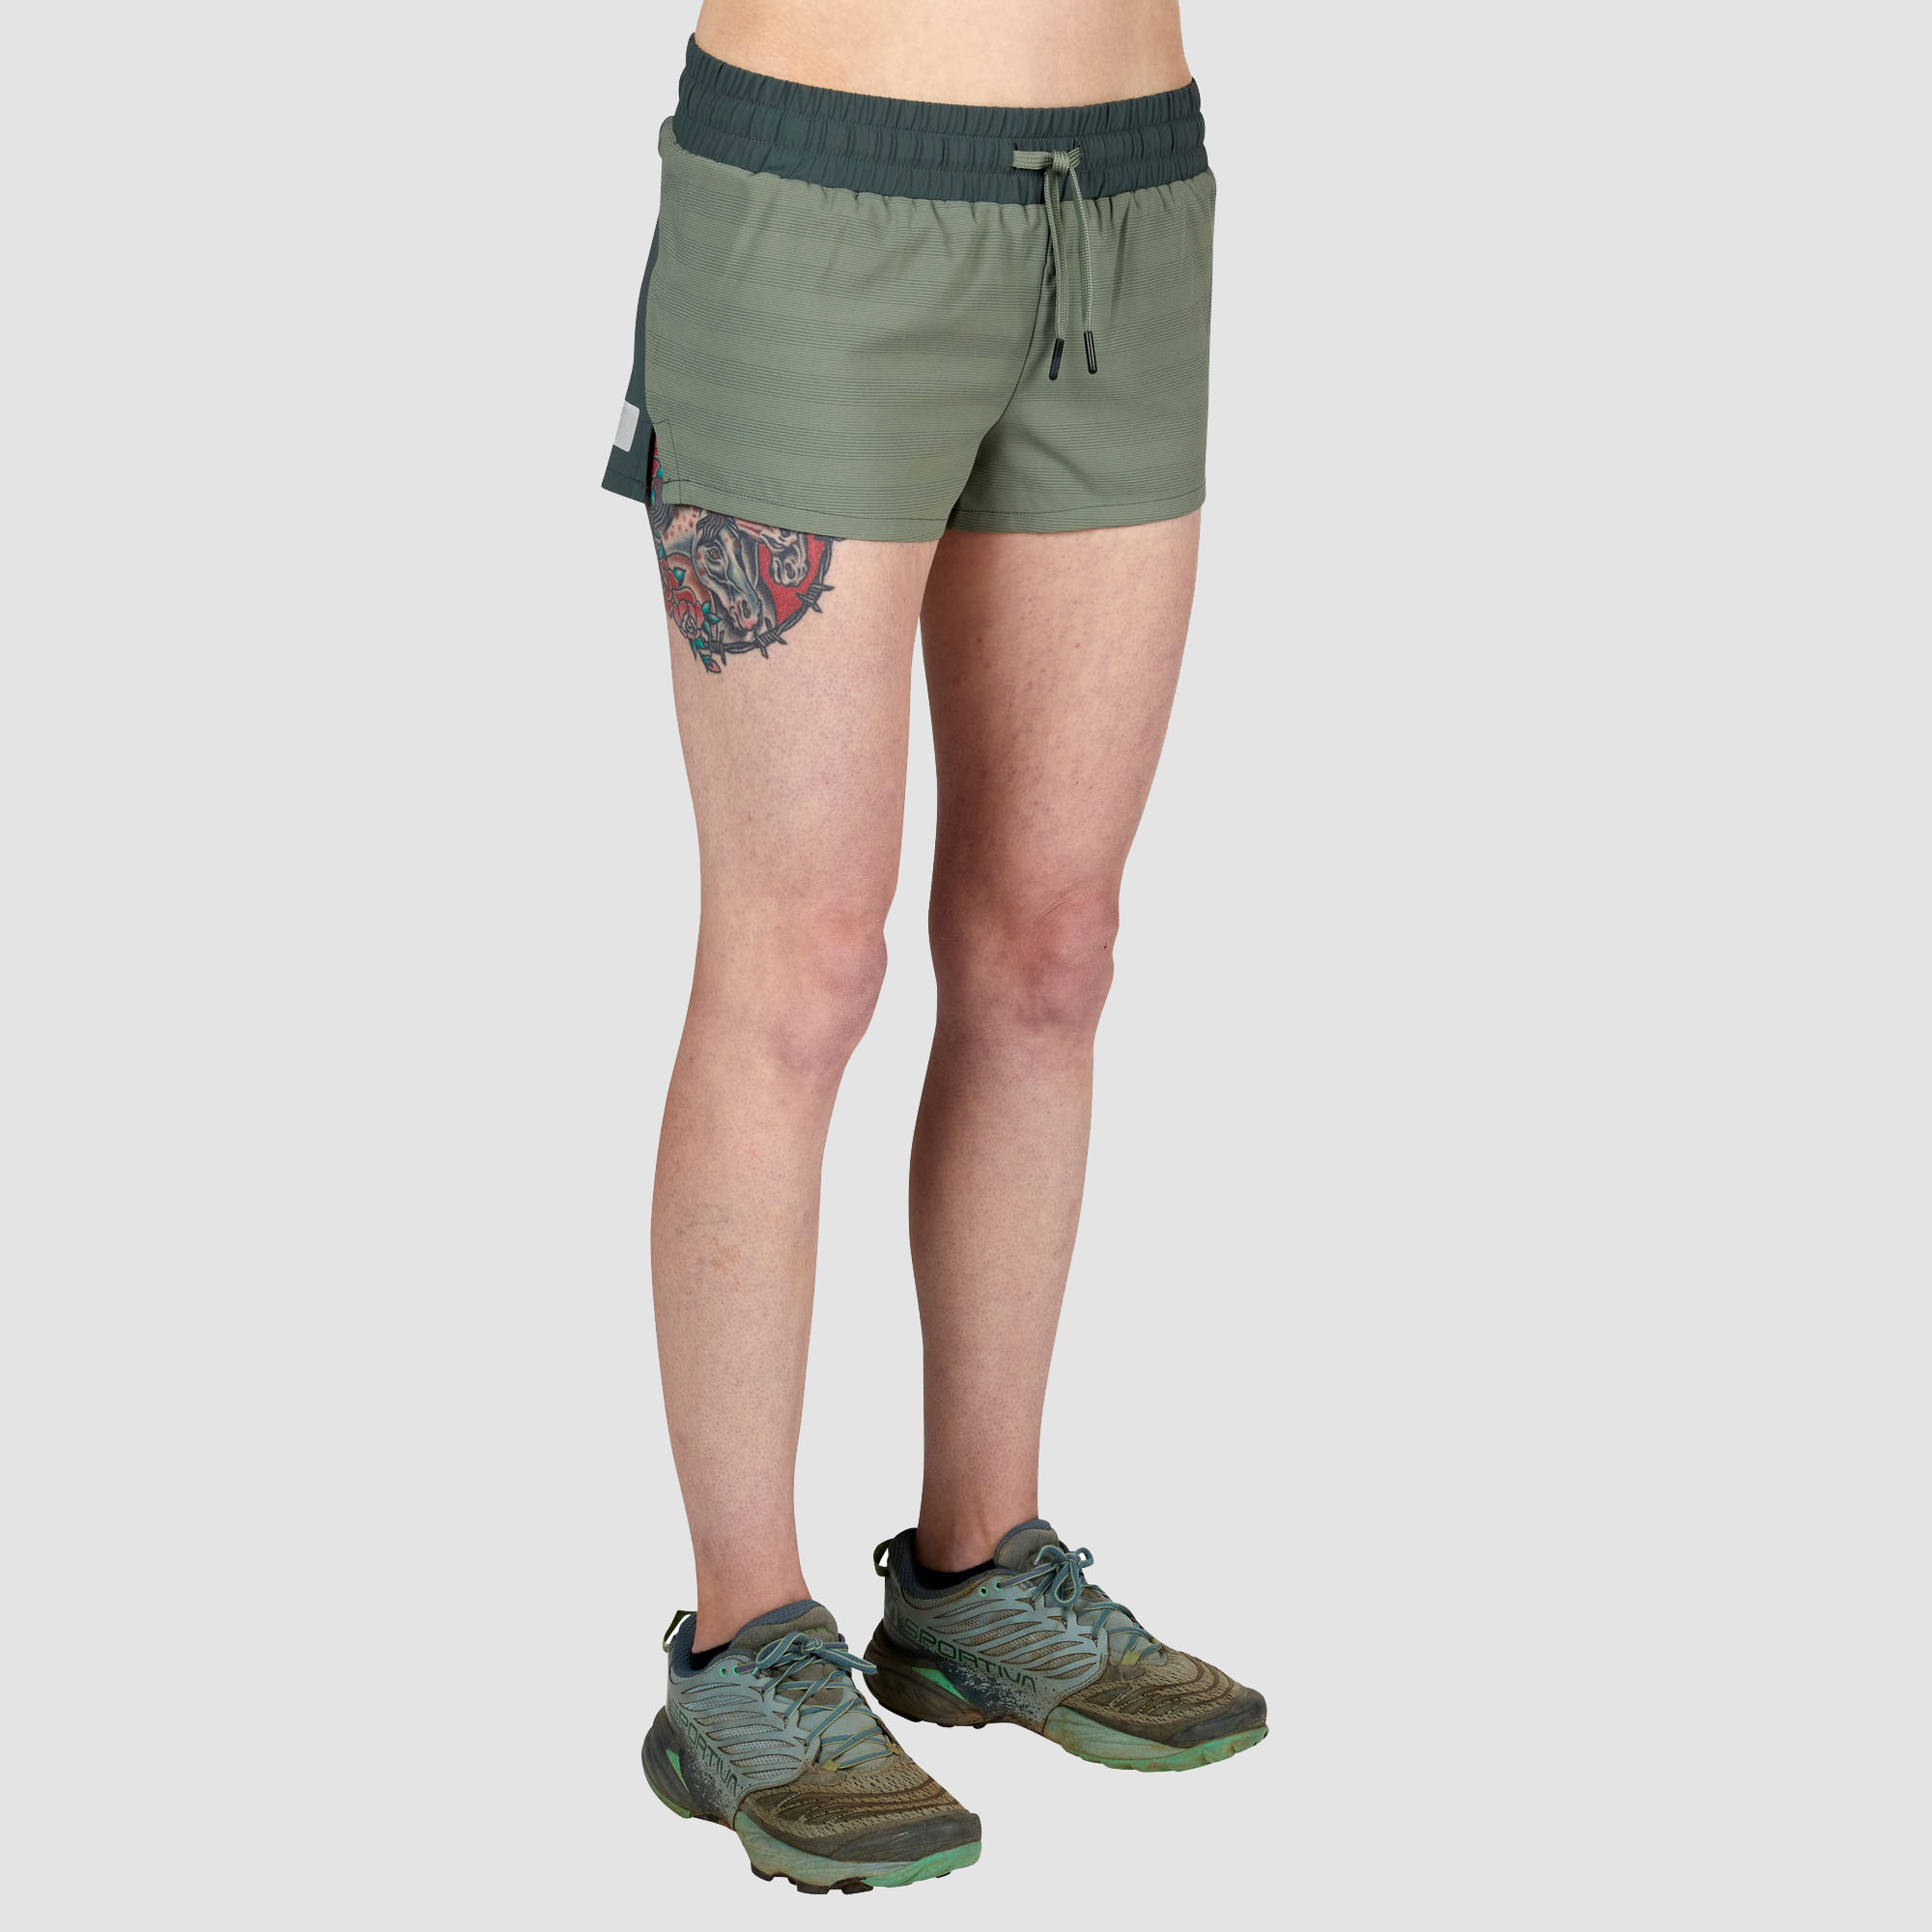 Ultimate Direction Women's Stratus Short - Prior Year in Camo Green Size Medium